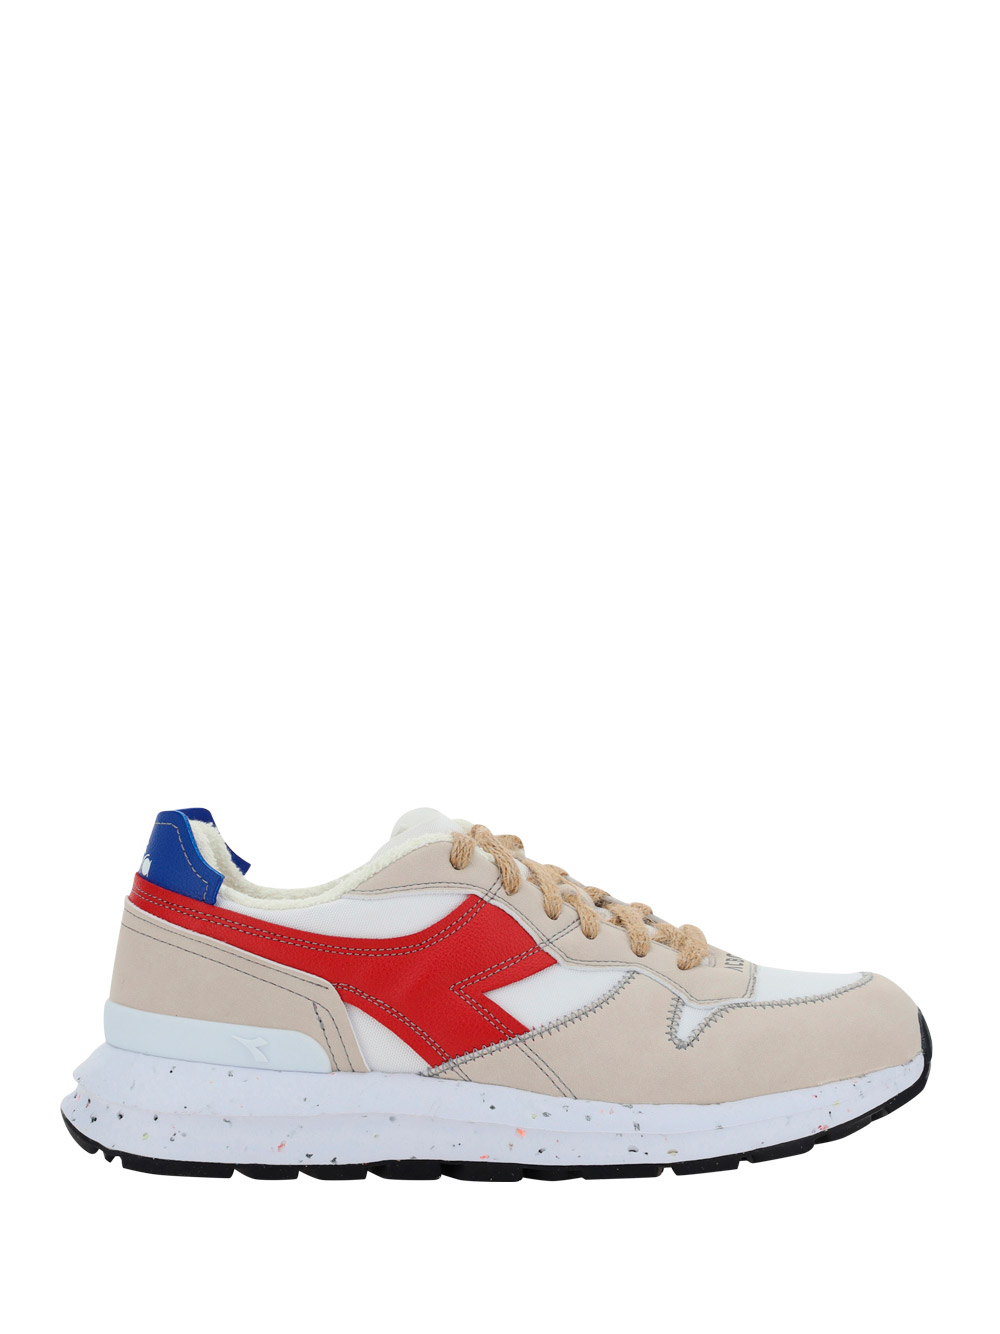 Acbc Diadora Sneakers In White/red/blue